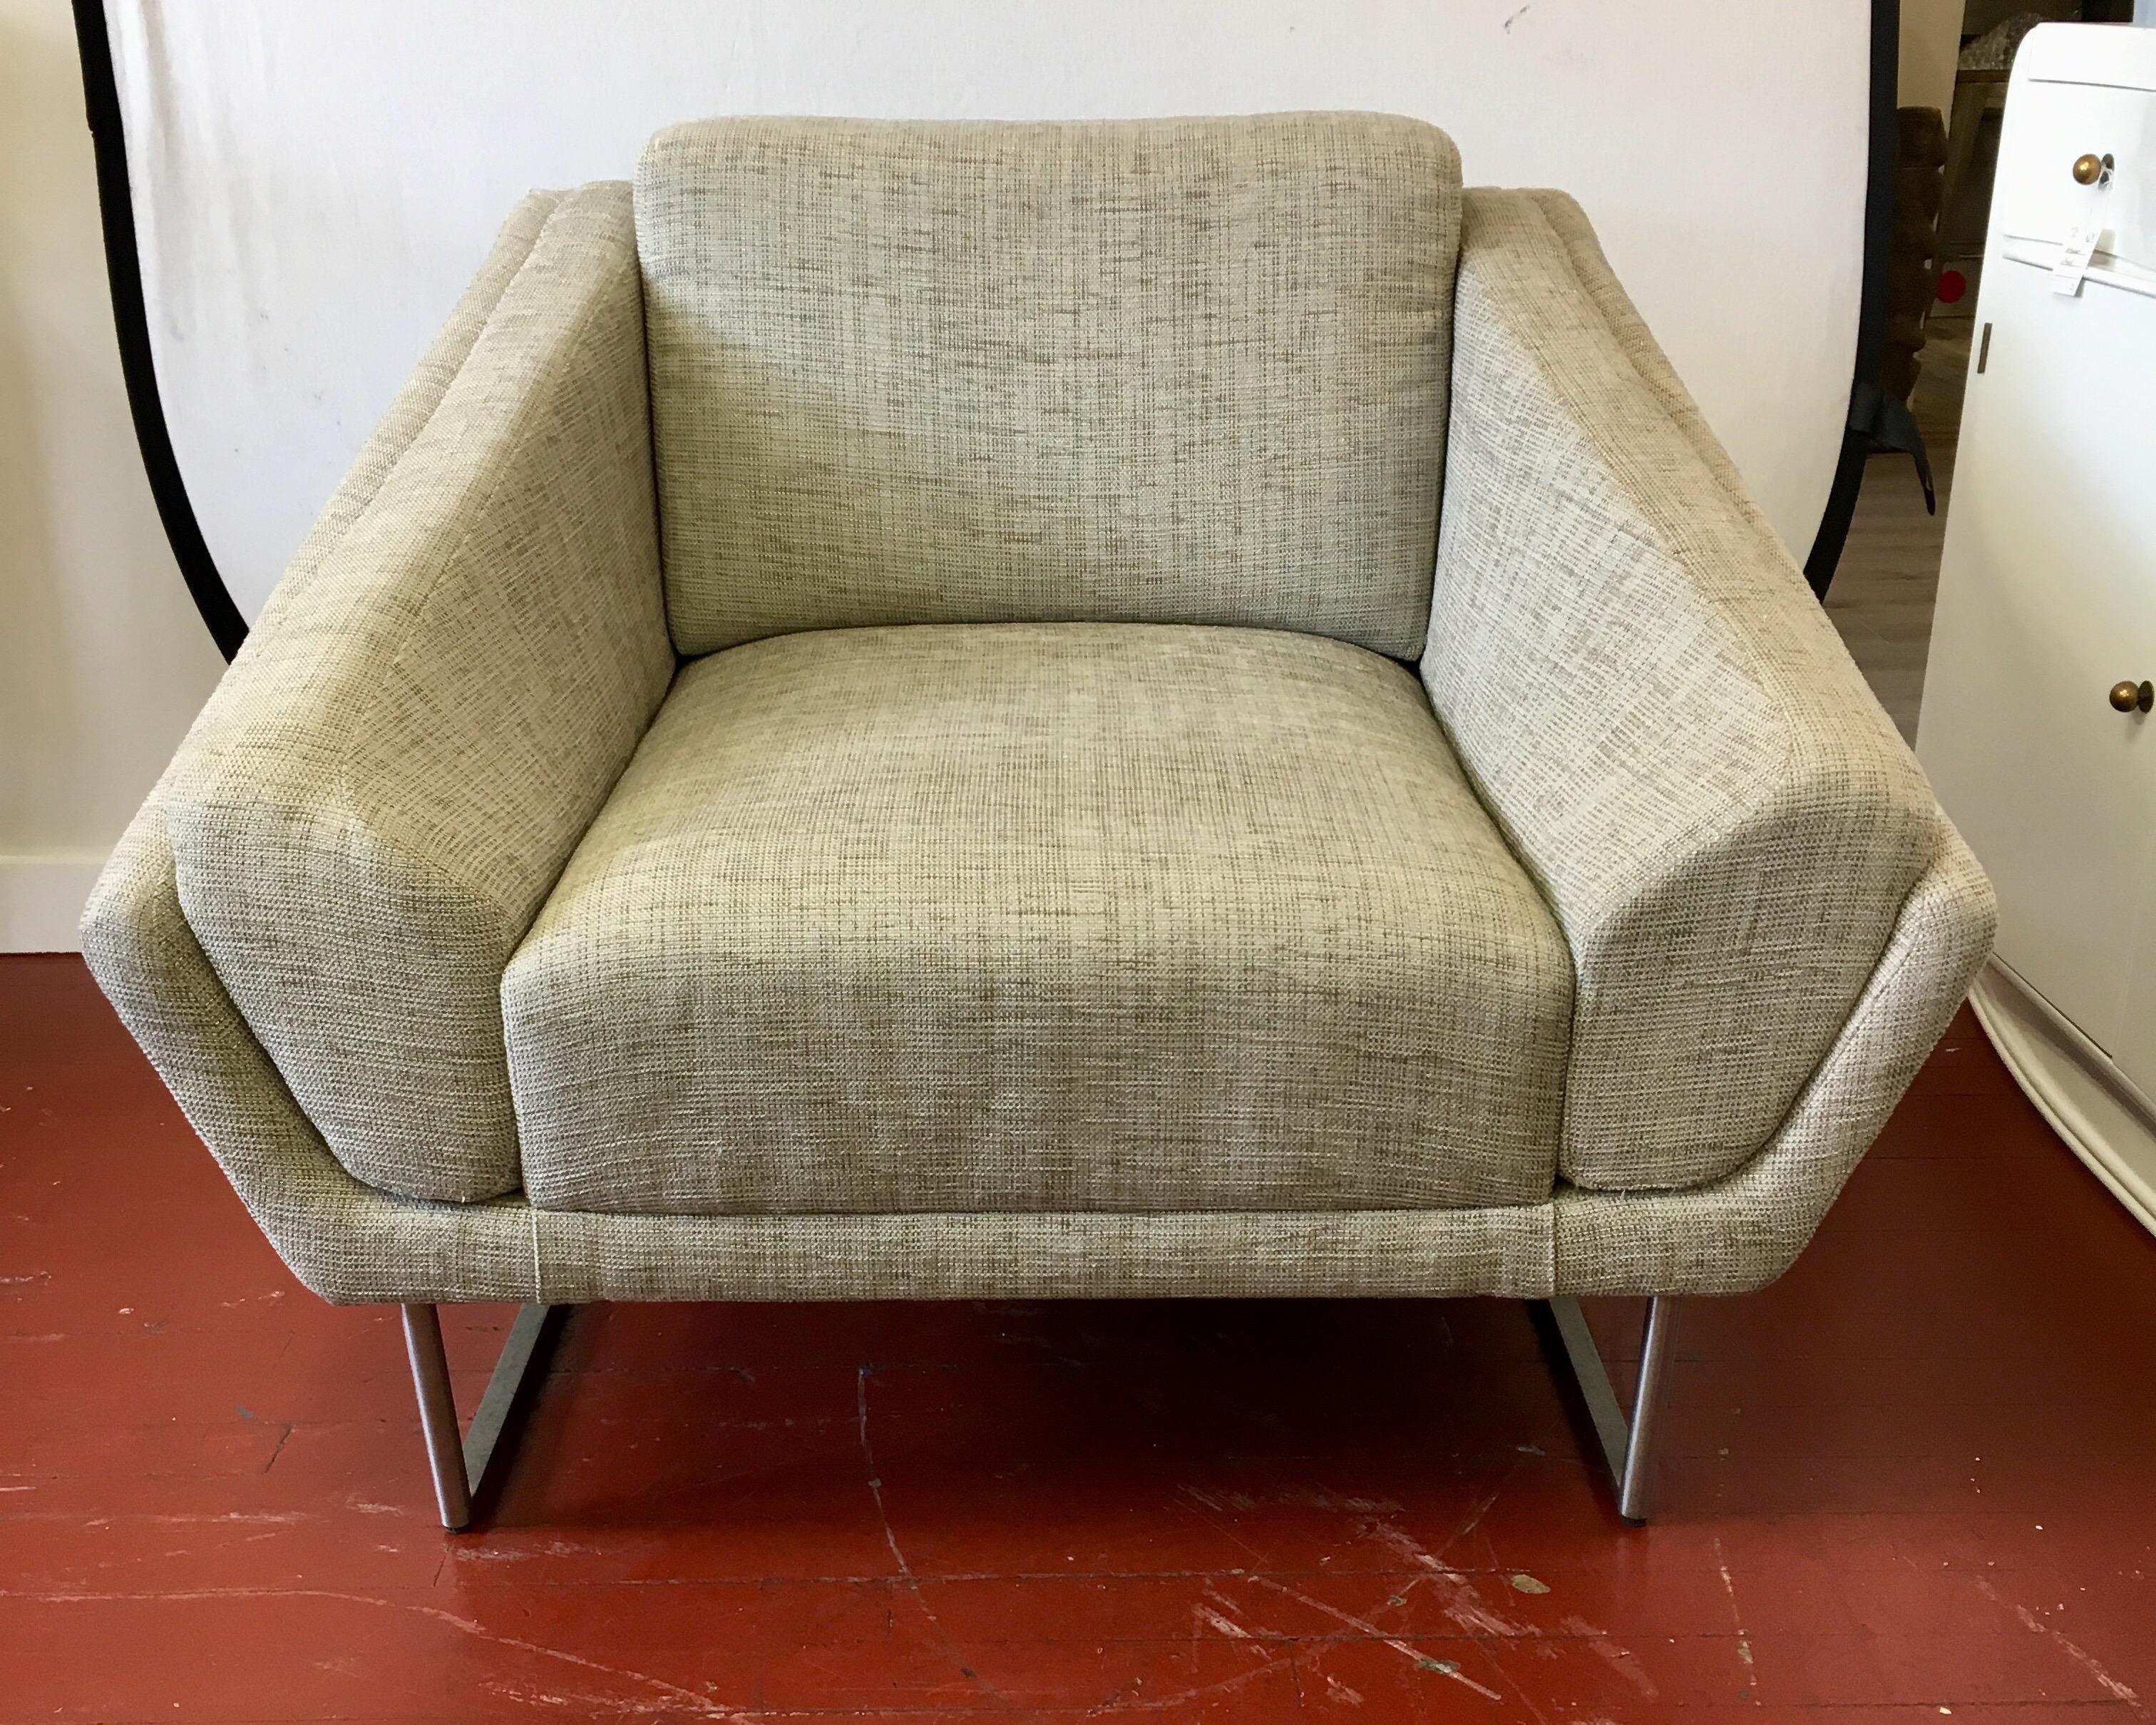 Mint condition, set of four curved lounge chairs by HBF Hickory, N.C. The upholstery is a medium gray cotton weave and in perfect condition. The base/legs are a polished chrome. HBF is affiliated with Barbara Barry and they design and manufacture